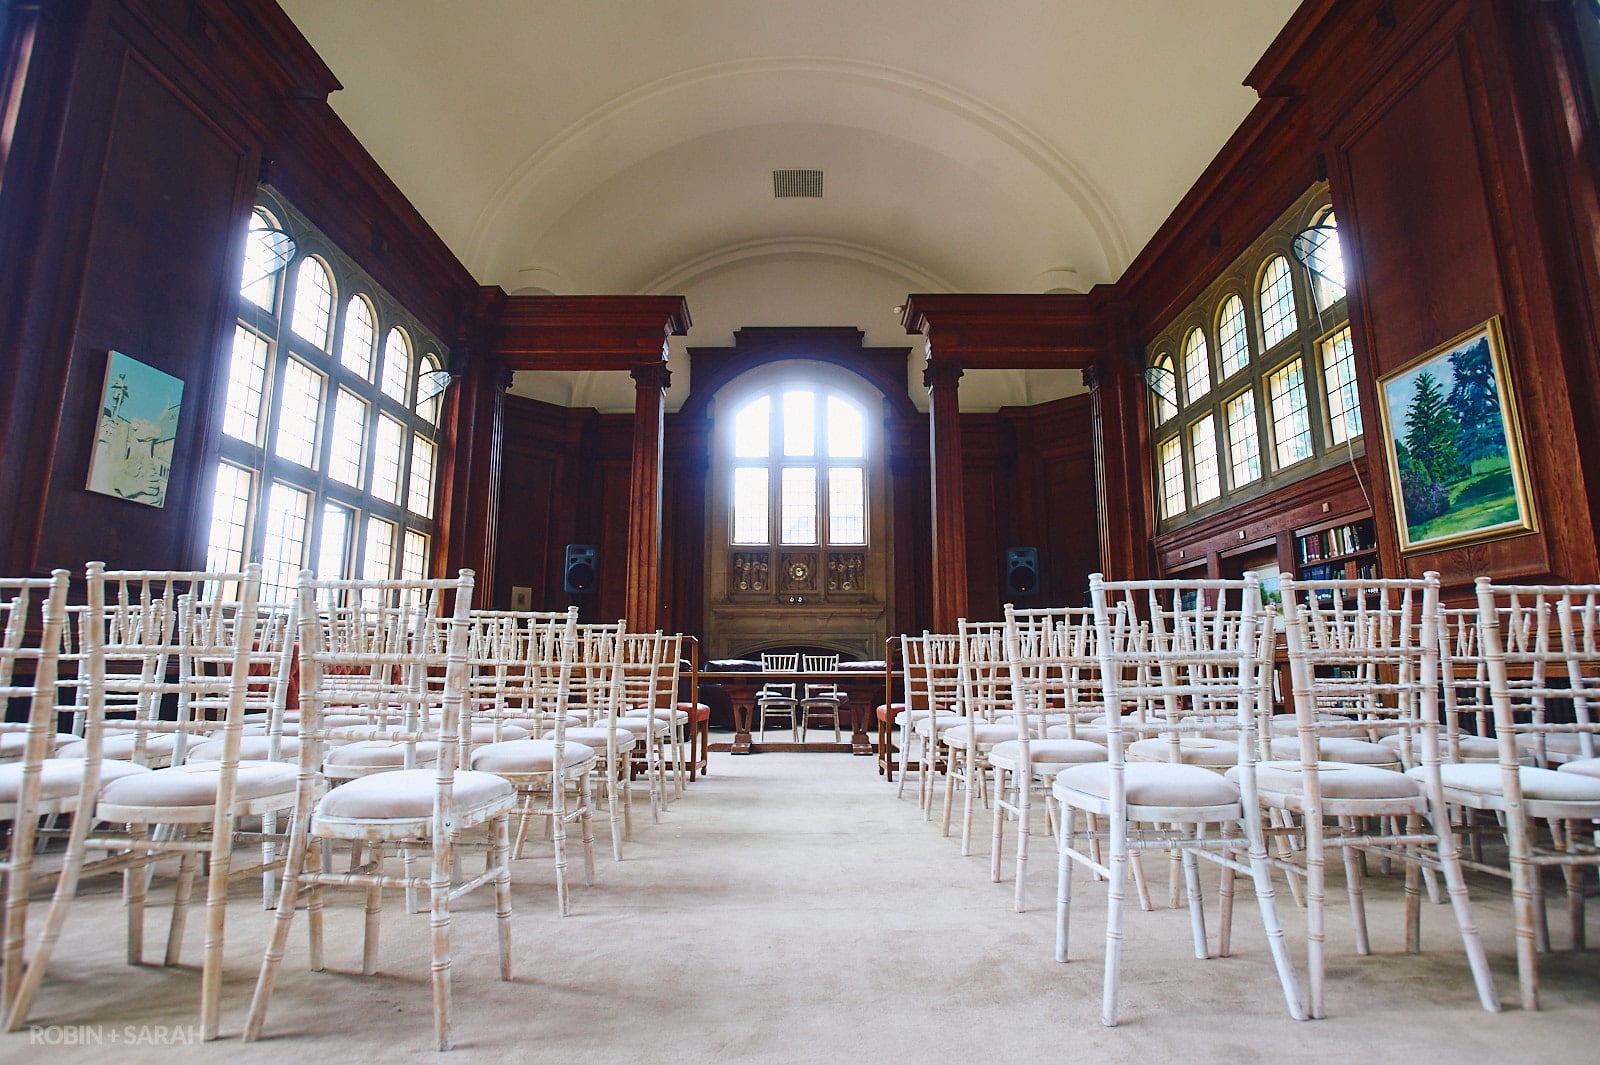 Interior of Malvern College Memorial Library laid out for wedding ceremony